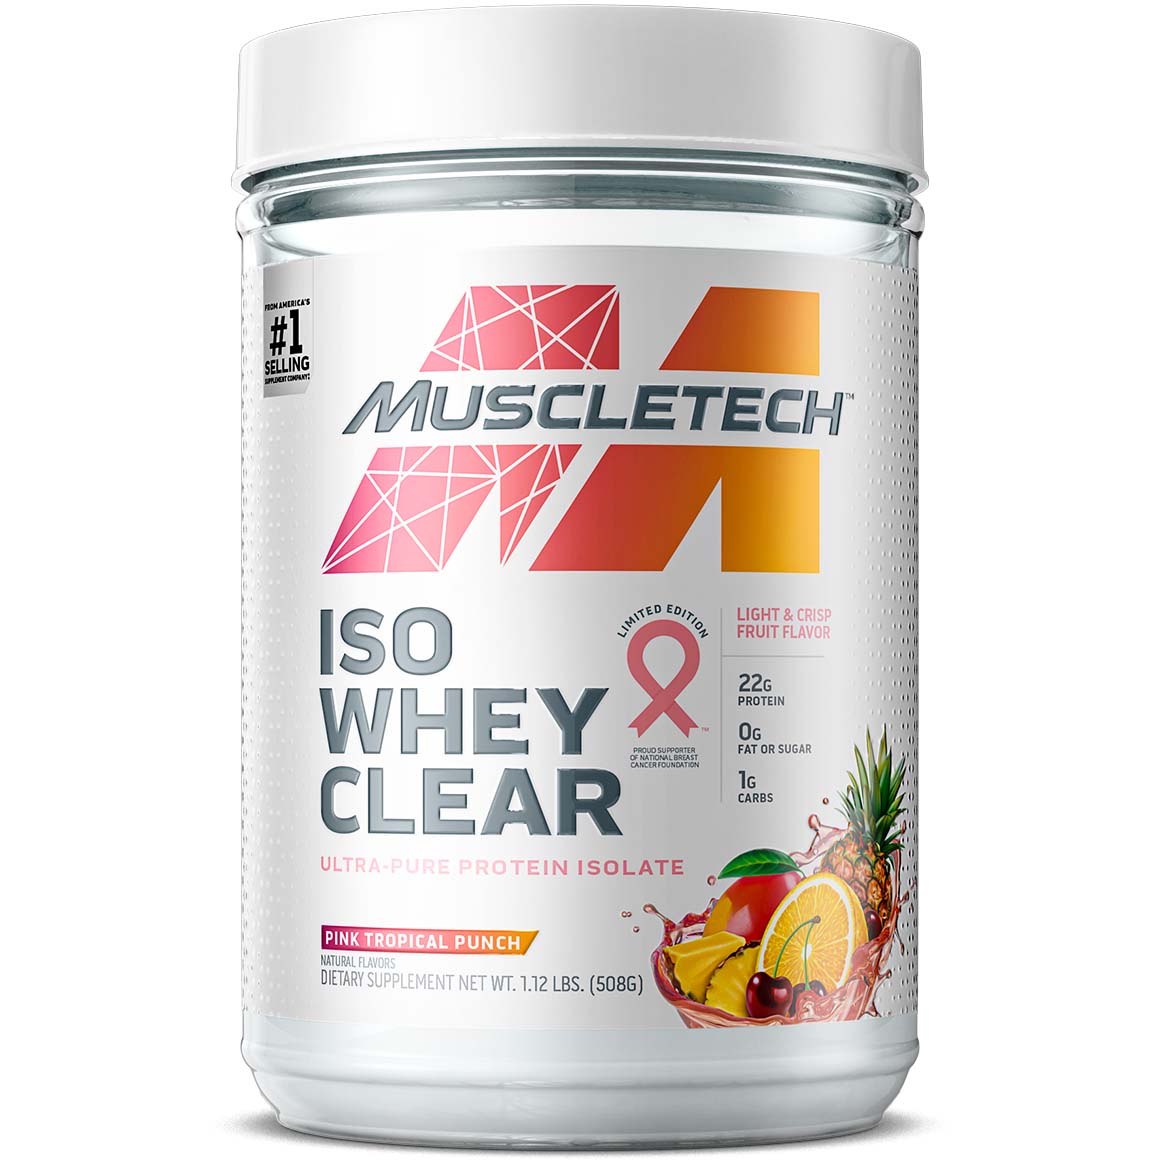 Muscletech Iso Whey Clear, Pink Tropical Punch, 1LB